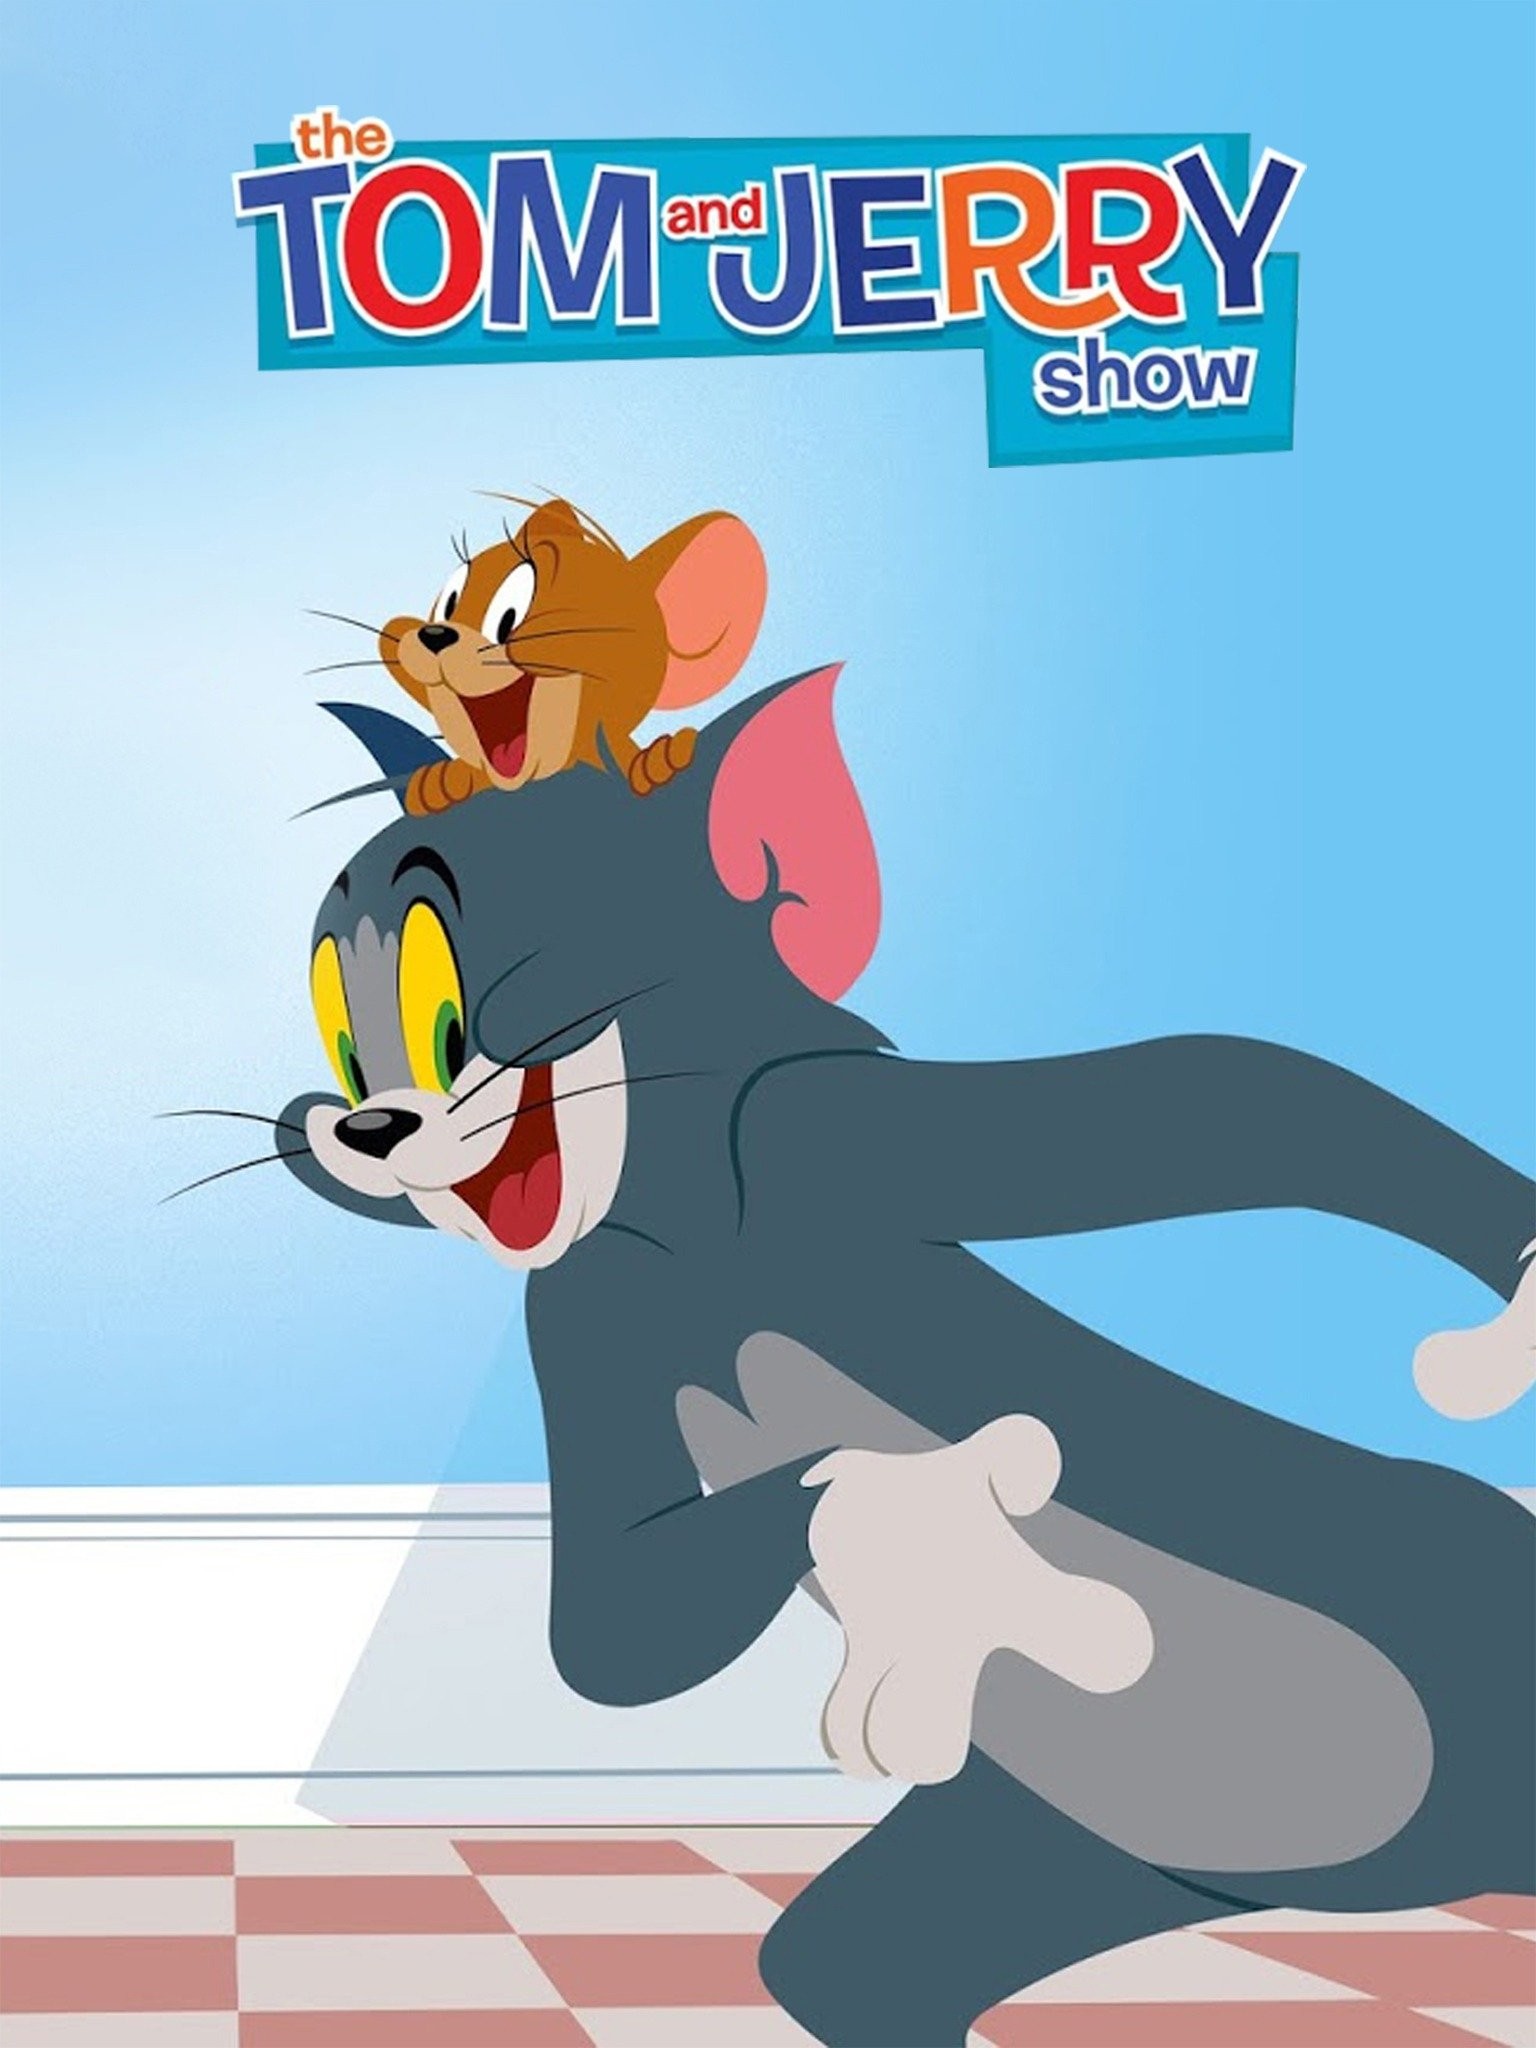 The Tom and Jerry Show: Season 3, Episode 25